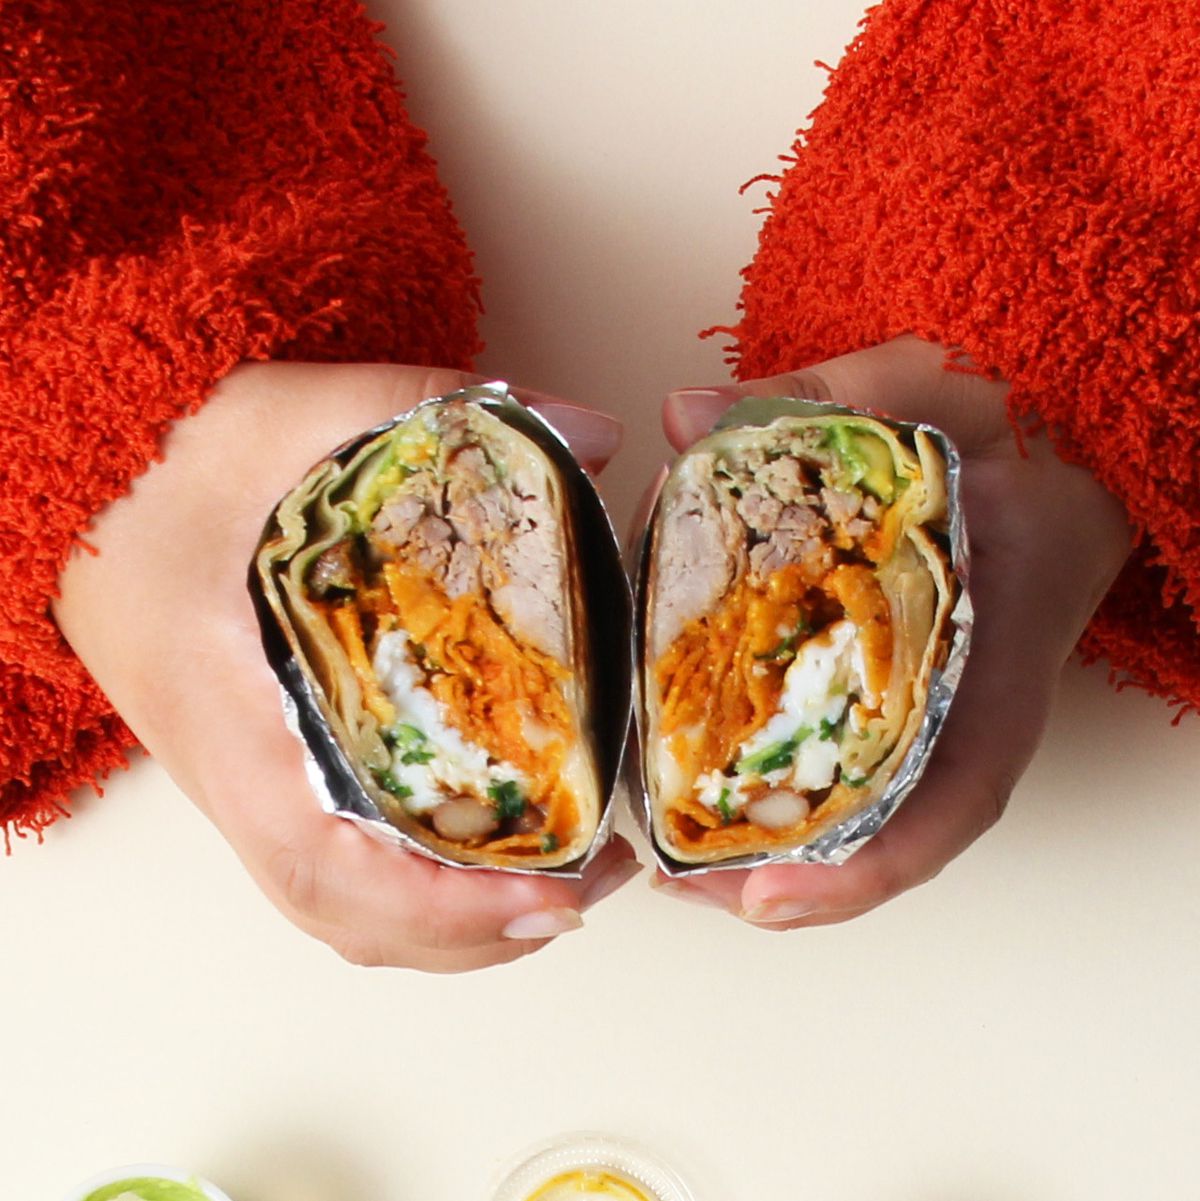 Two hands hold a burrito from Los Burros Supremos.